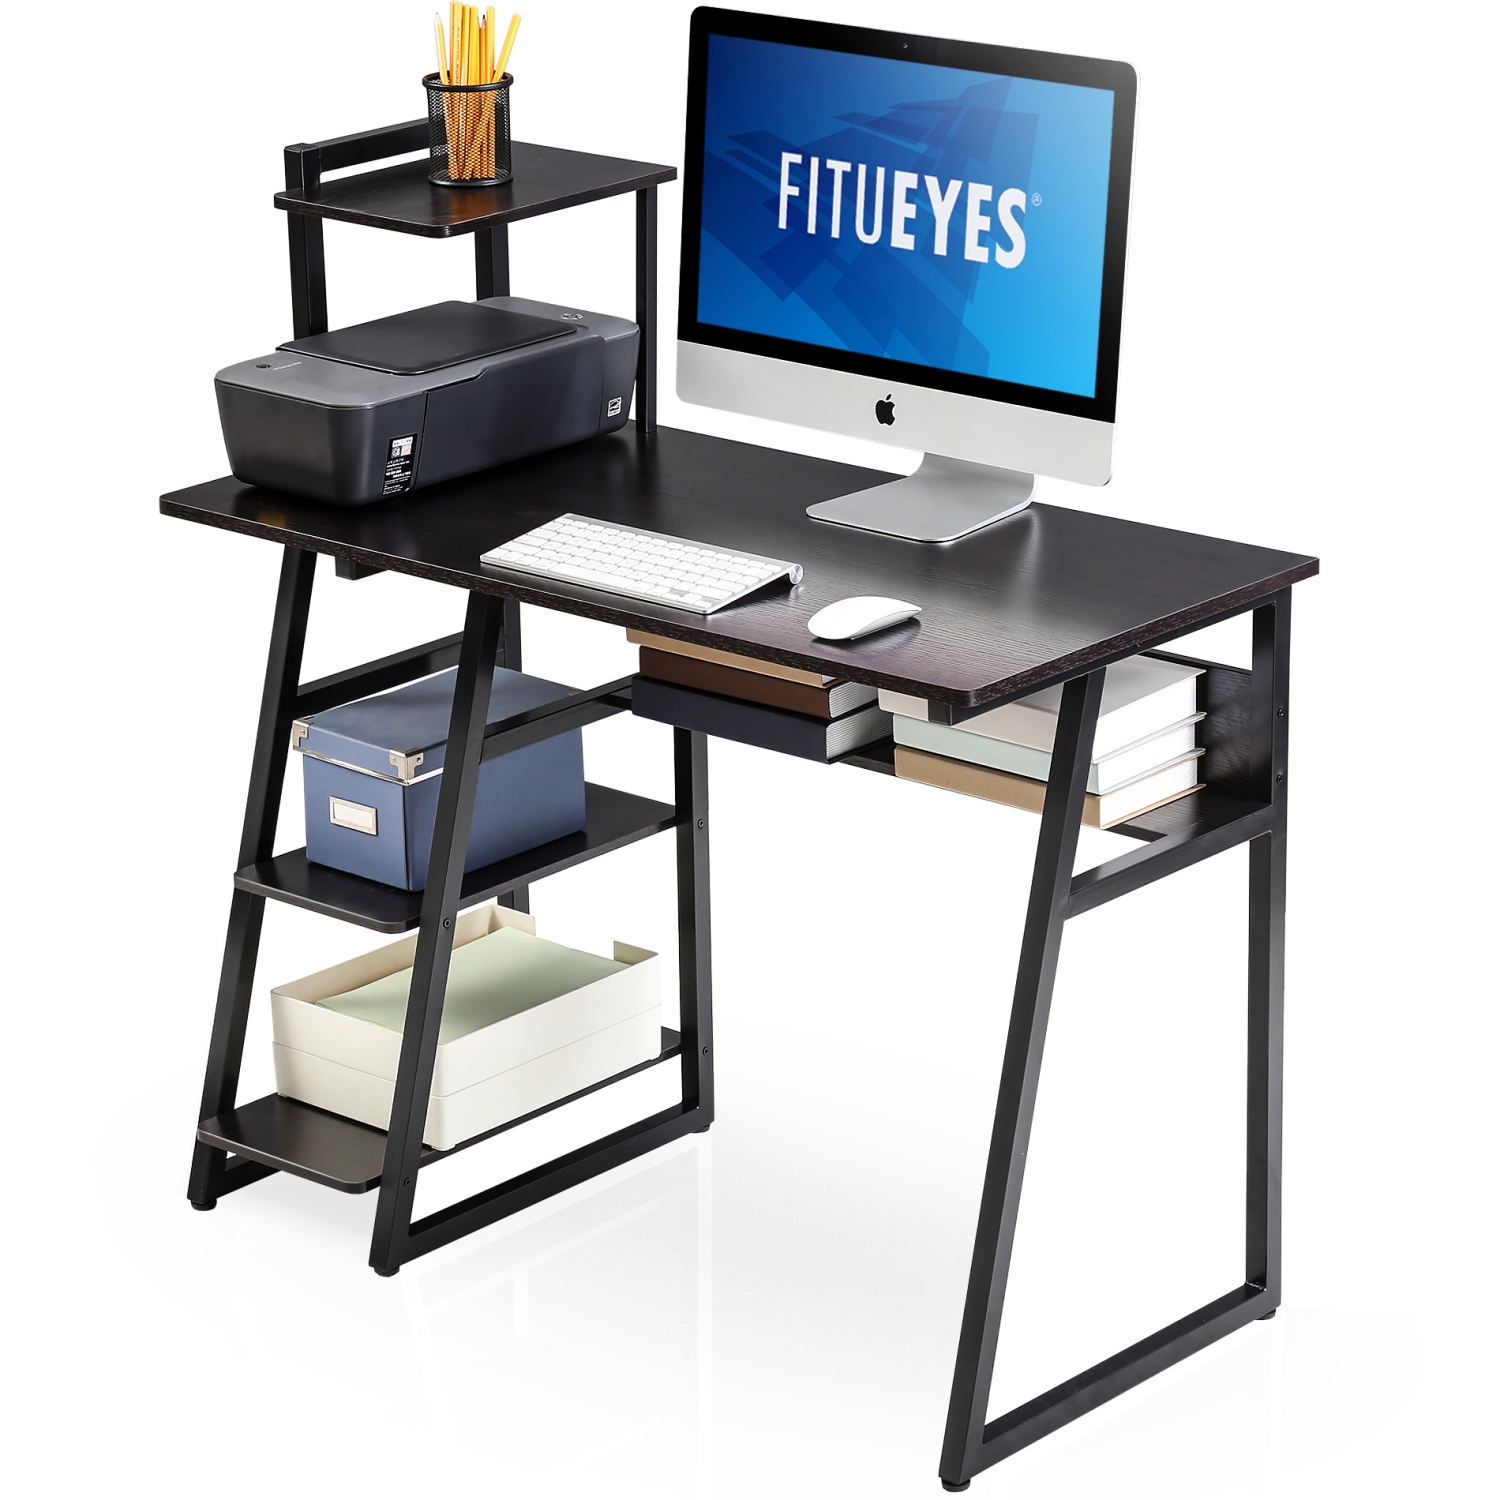 FITUEYES Computer Desk Study Workstation Office Table with Storage Shelves, Writing Table with Tower Shelf for Home Office,CD210301WB (Black)